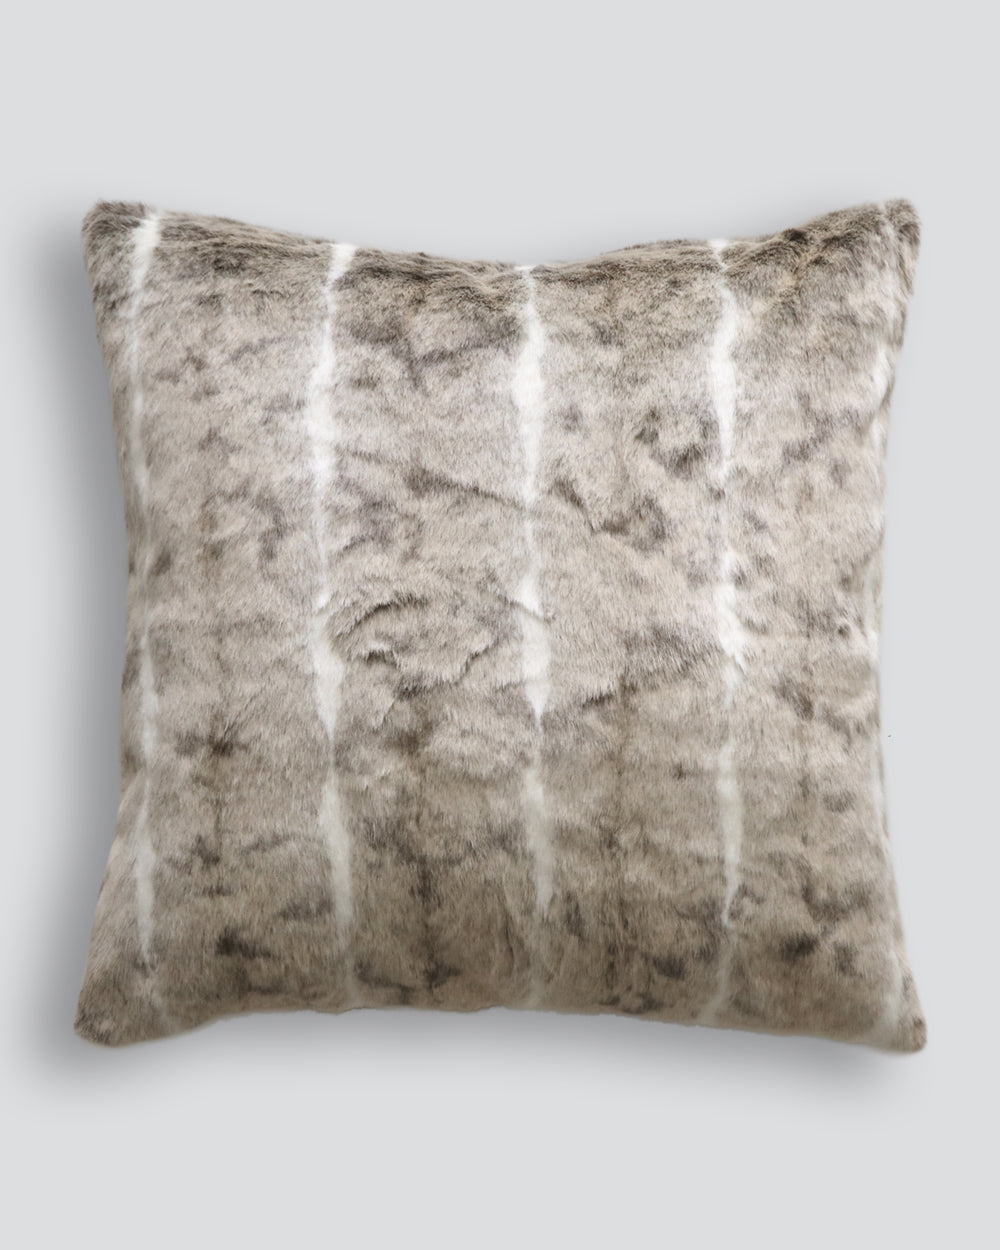 Heirloom Mountain Rabbit Cushions in Faux Fur are available from Make Your House A Home Premium Stockist. Furniture Store Bendigo, Victoria. Australia Wide Delivery. Furtex Baya.